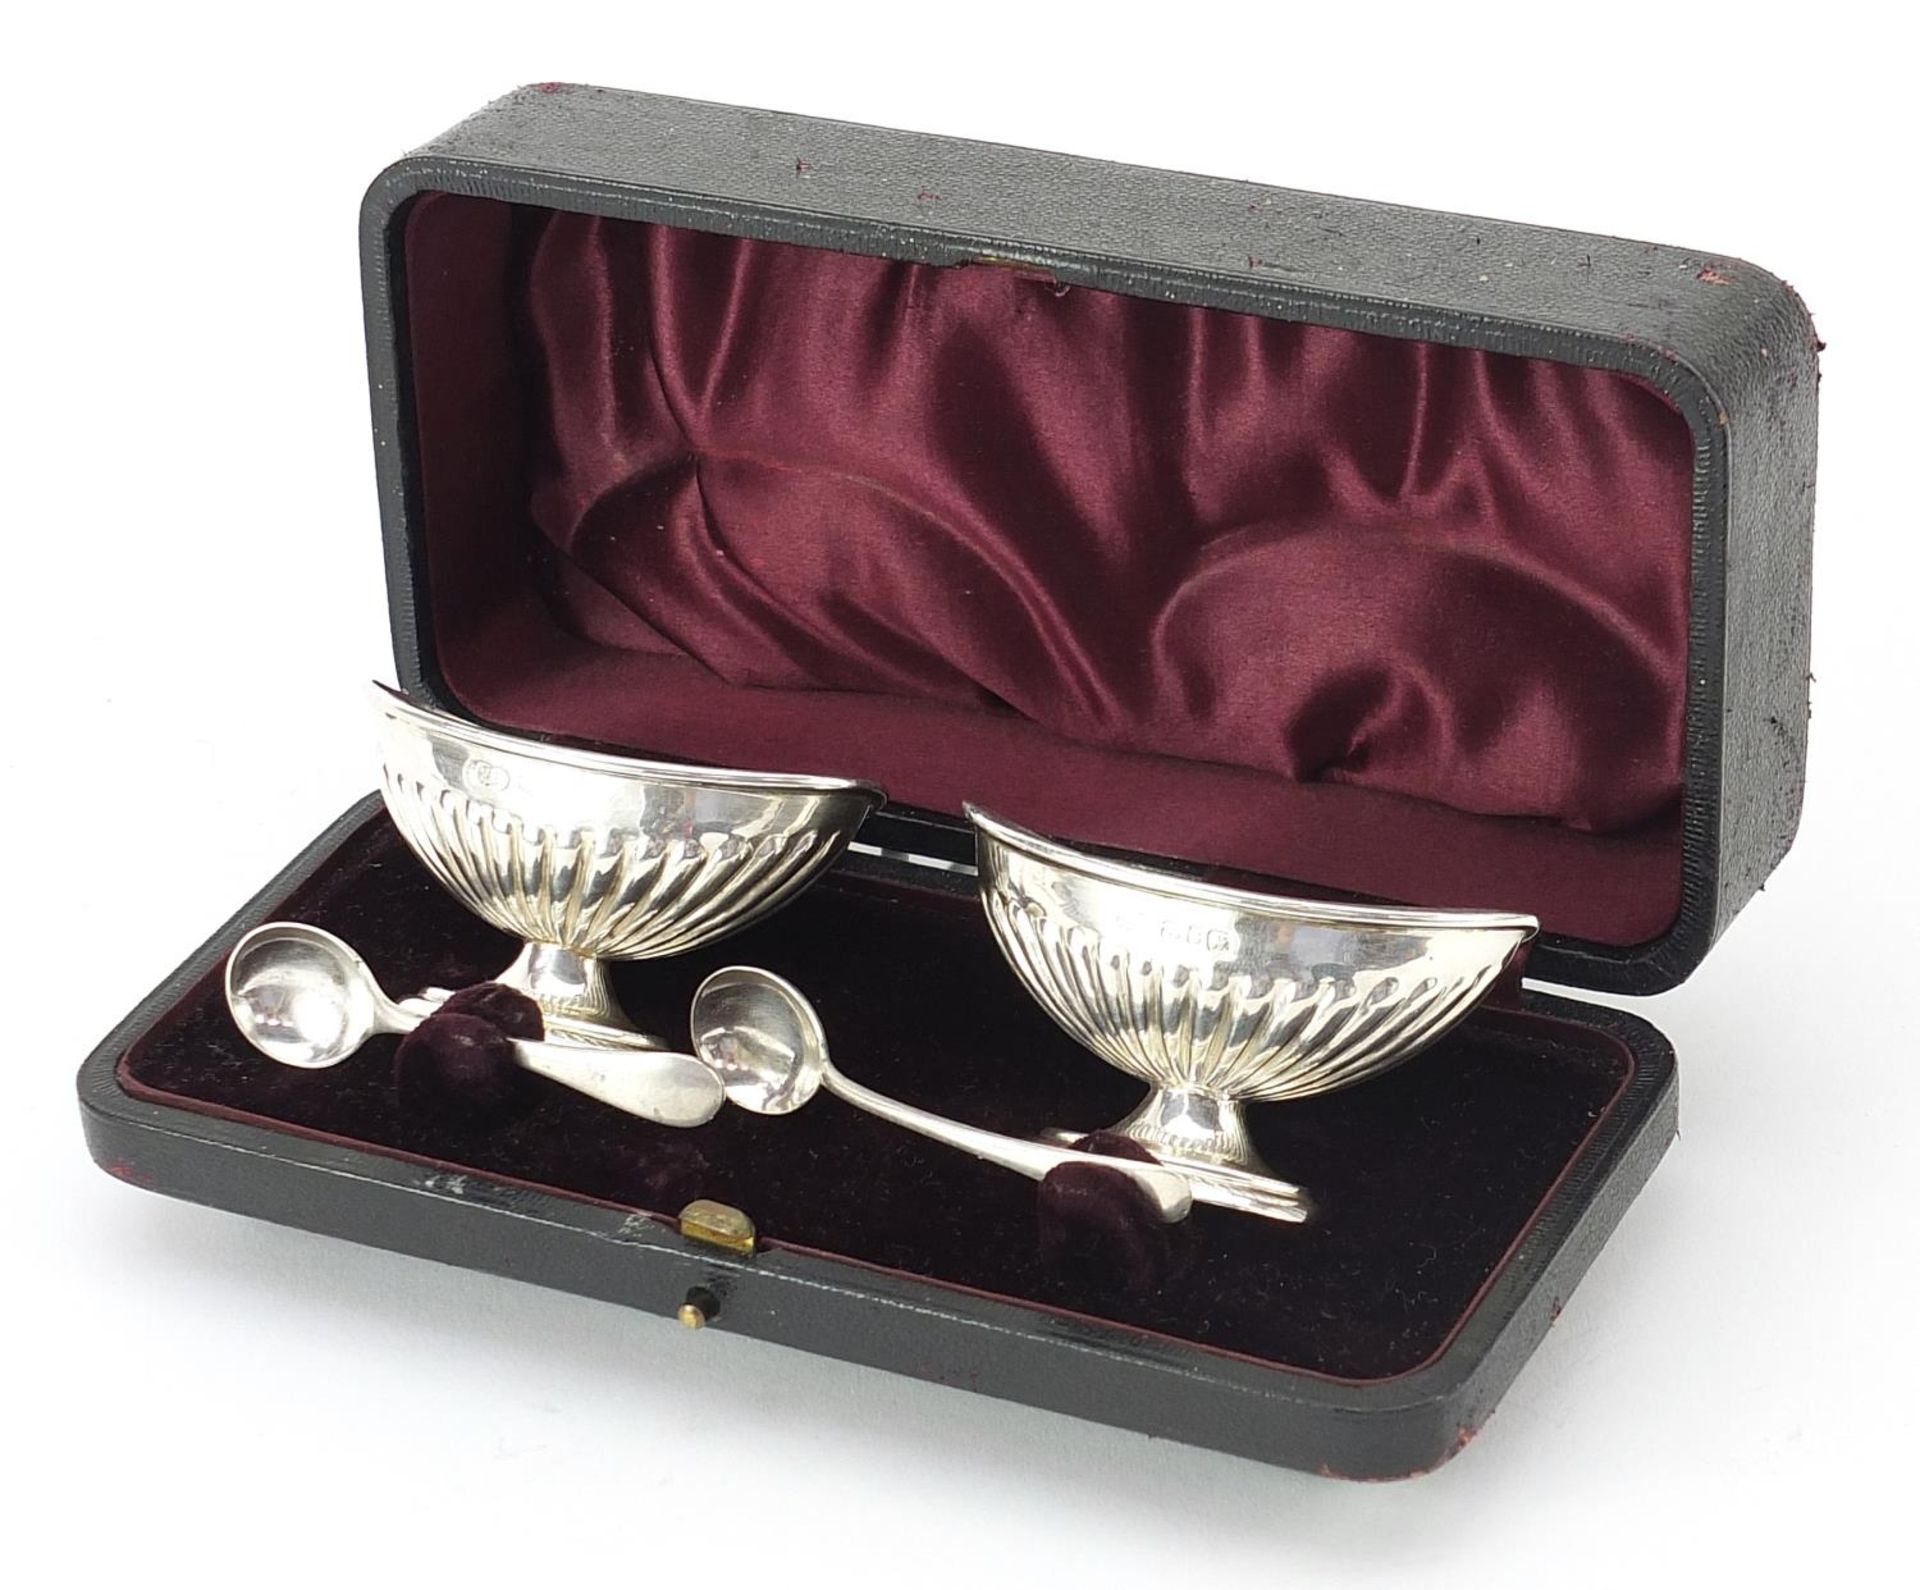 Nathan & Hayes, Pair of Victorian silver salts with a silver spoon and matched silver plated spoon